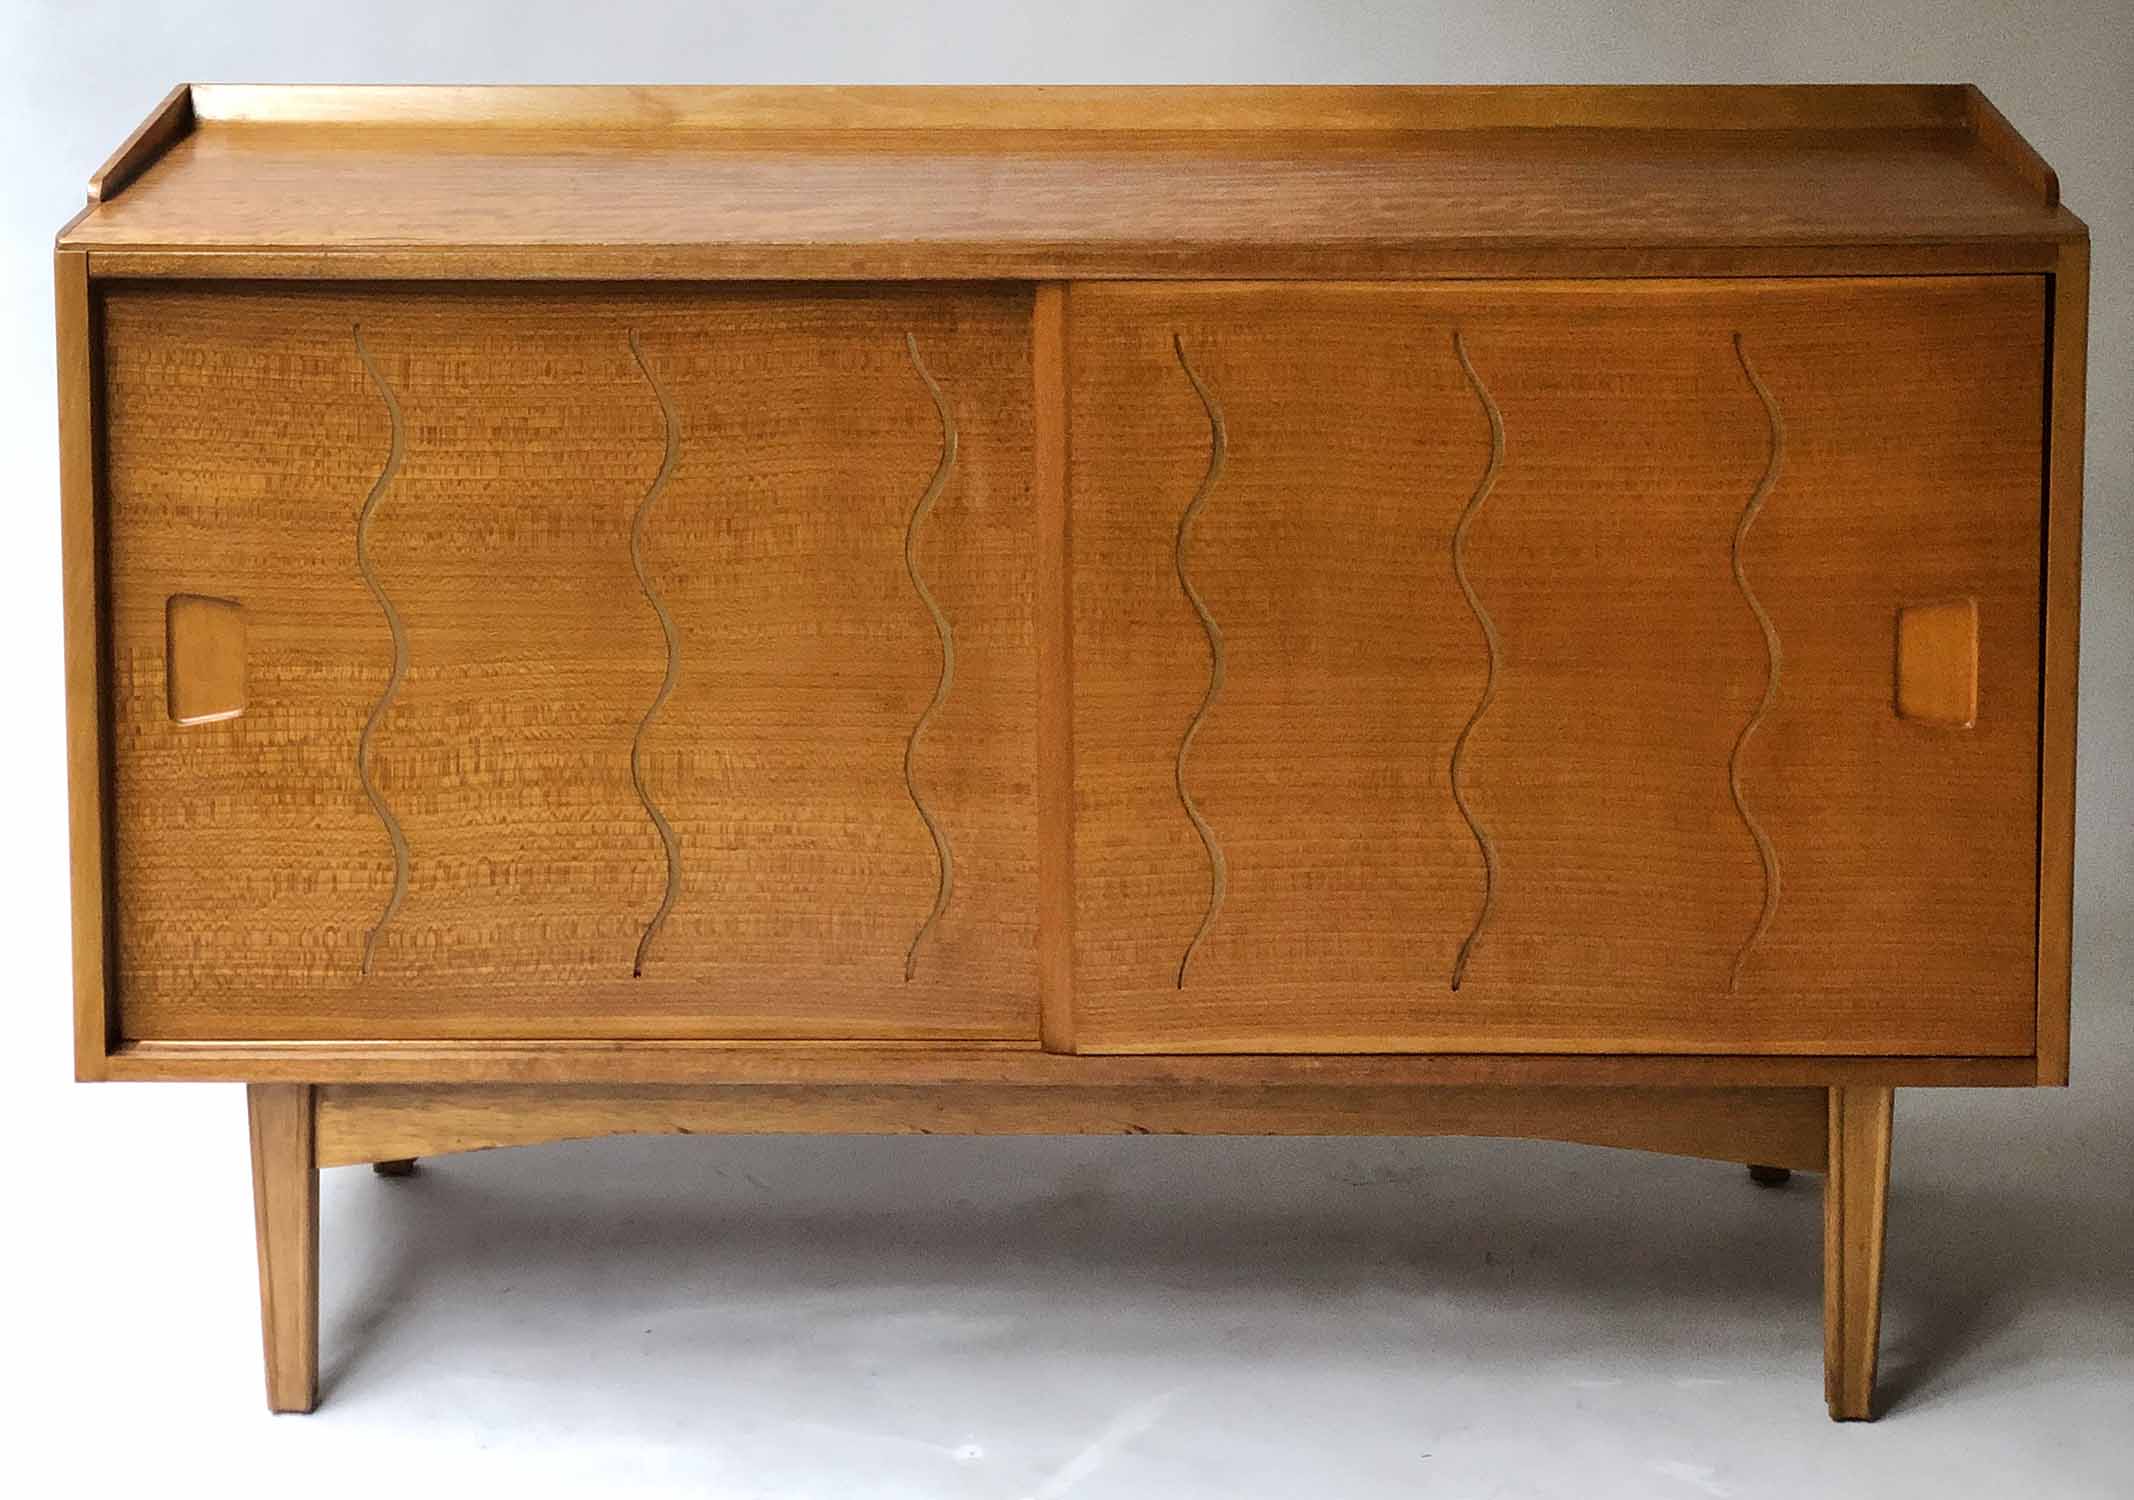 SIDEBOARD BY IAN AUDSLEY FOR G W EVANS, mid 20th century walnut and elm with sliding doors,